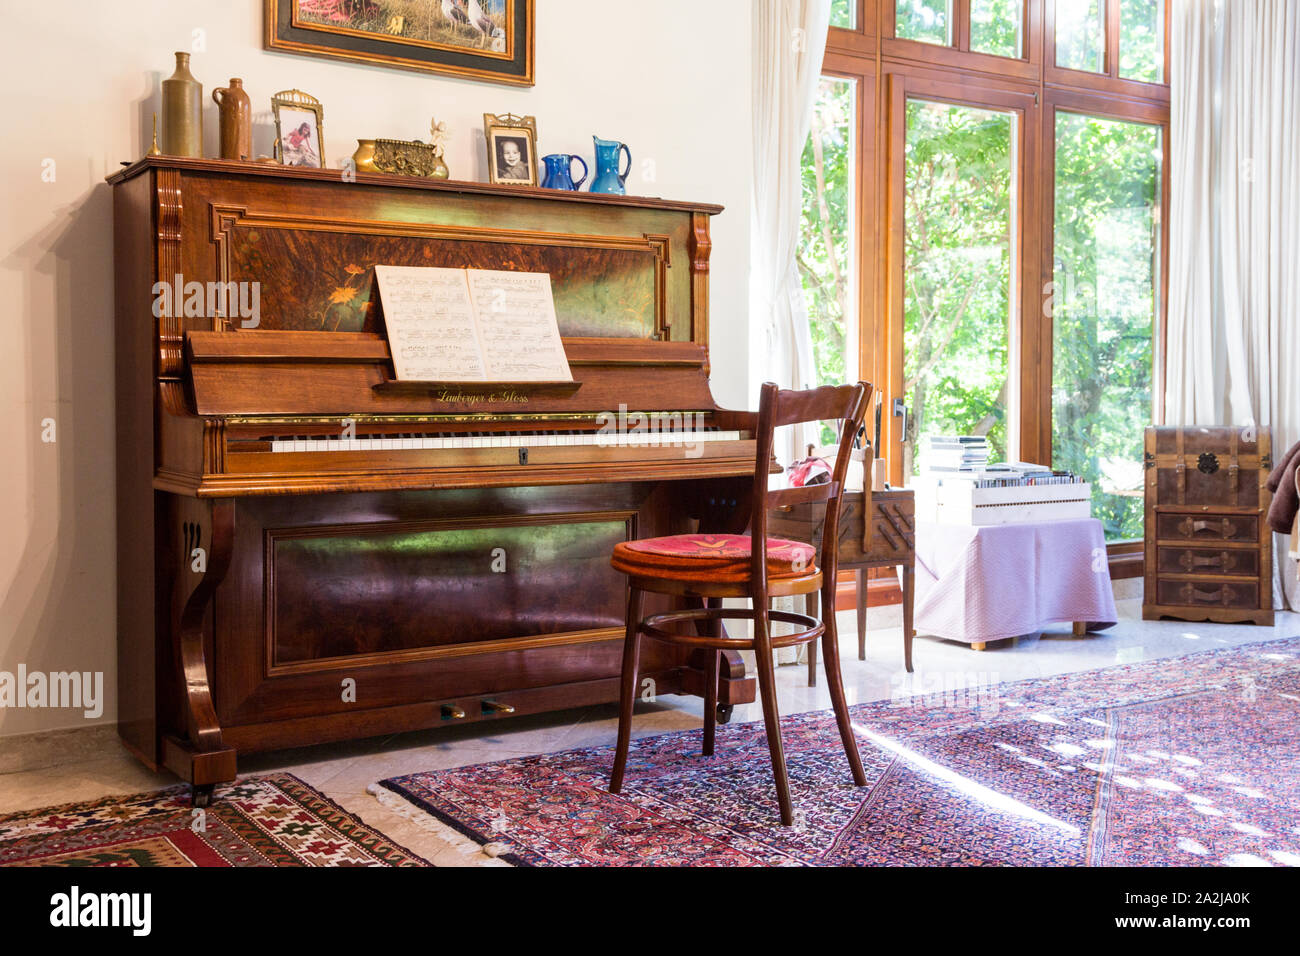 Lauberger & Gloss classic antique upright piano with open sheet music in  bright living room, Lőverek, Sopron, Hungary Stock Photo - Alamy